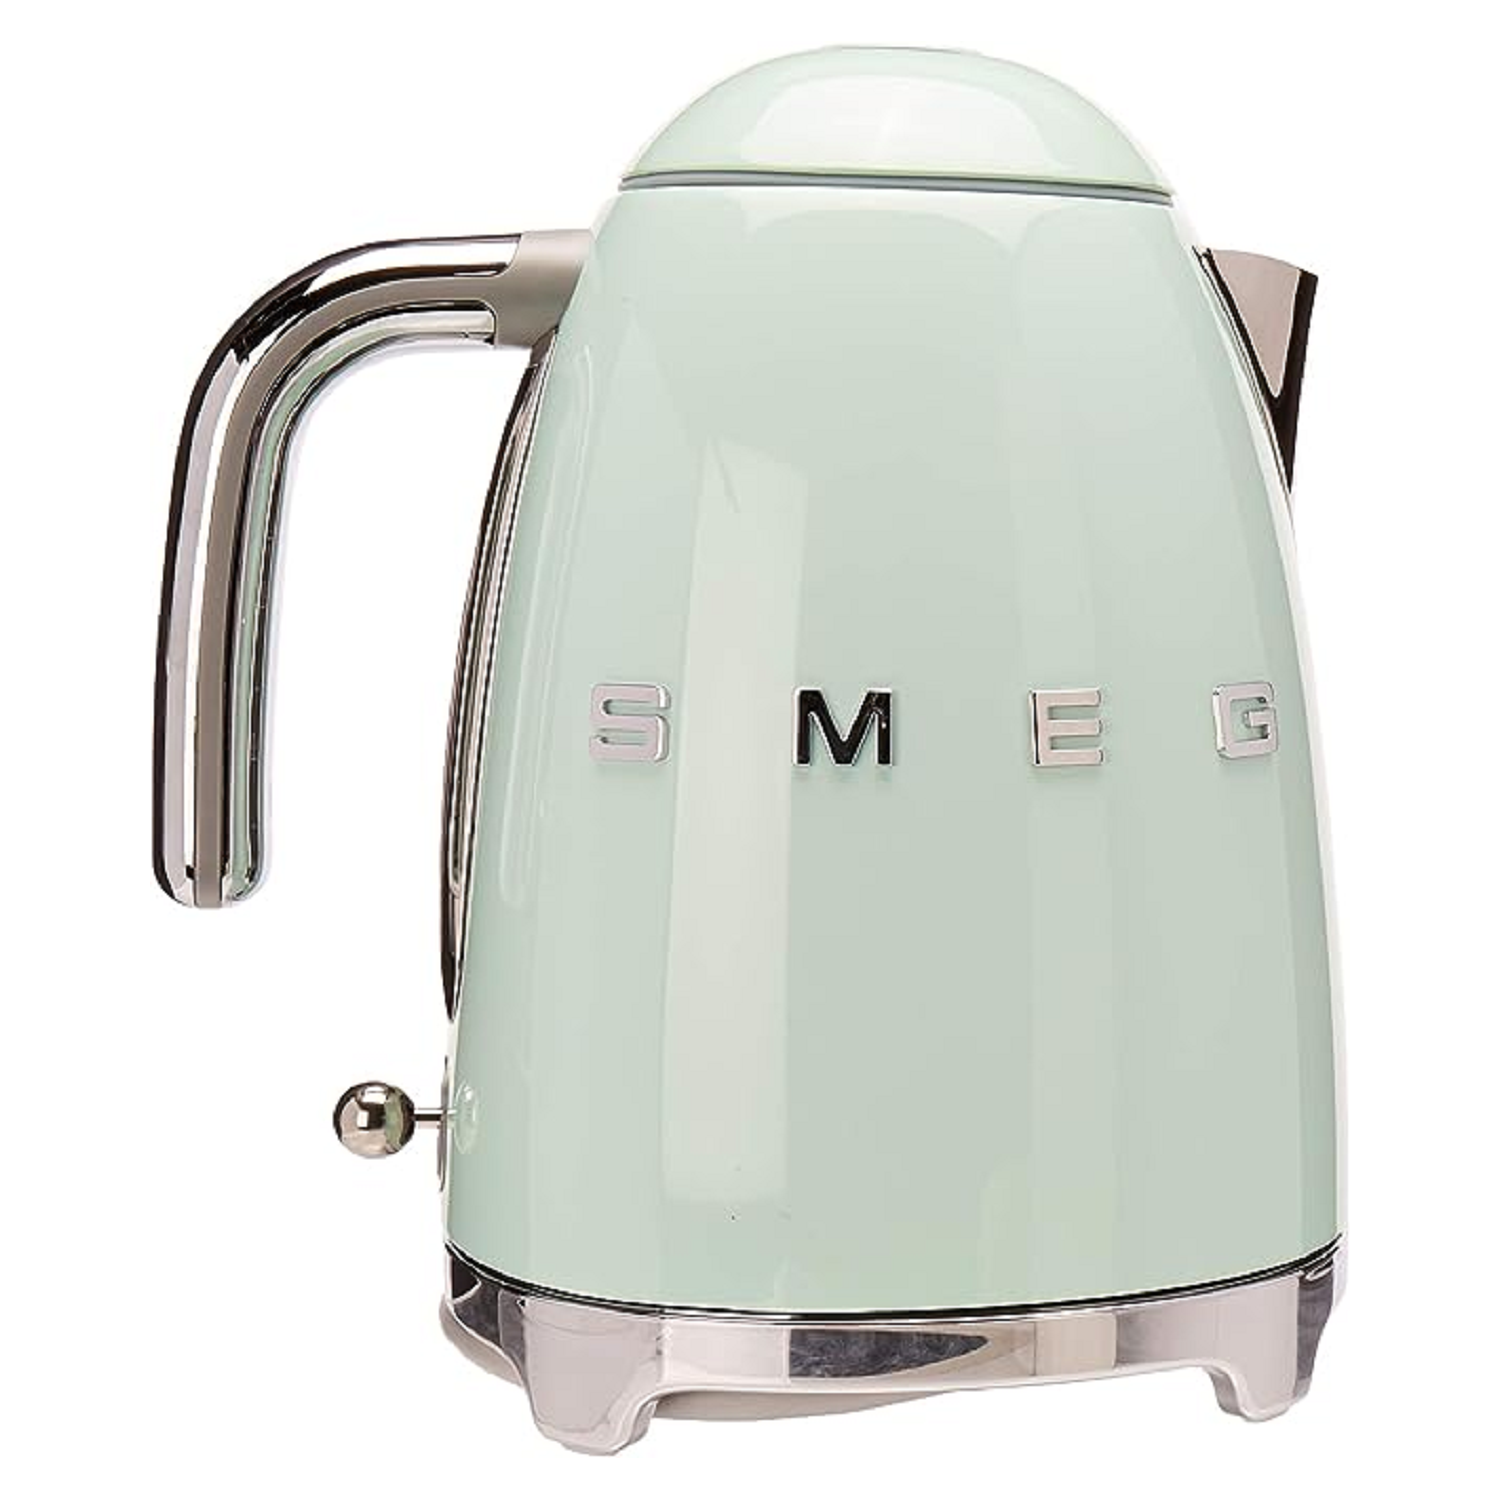 Smeg KLF03PGUS 50's Retro Style Aesthetic Electric Kettle with Embossed Logo, Pastel Green